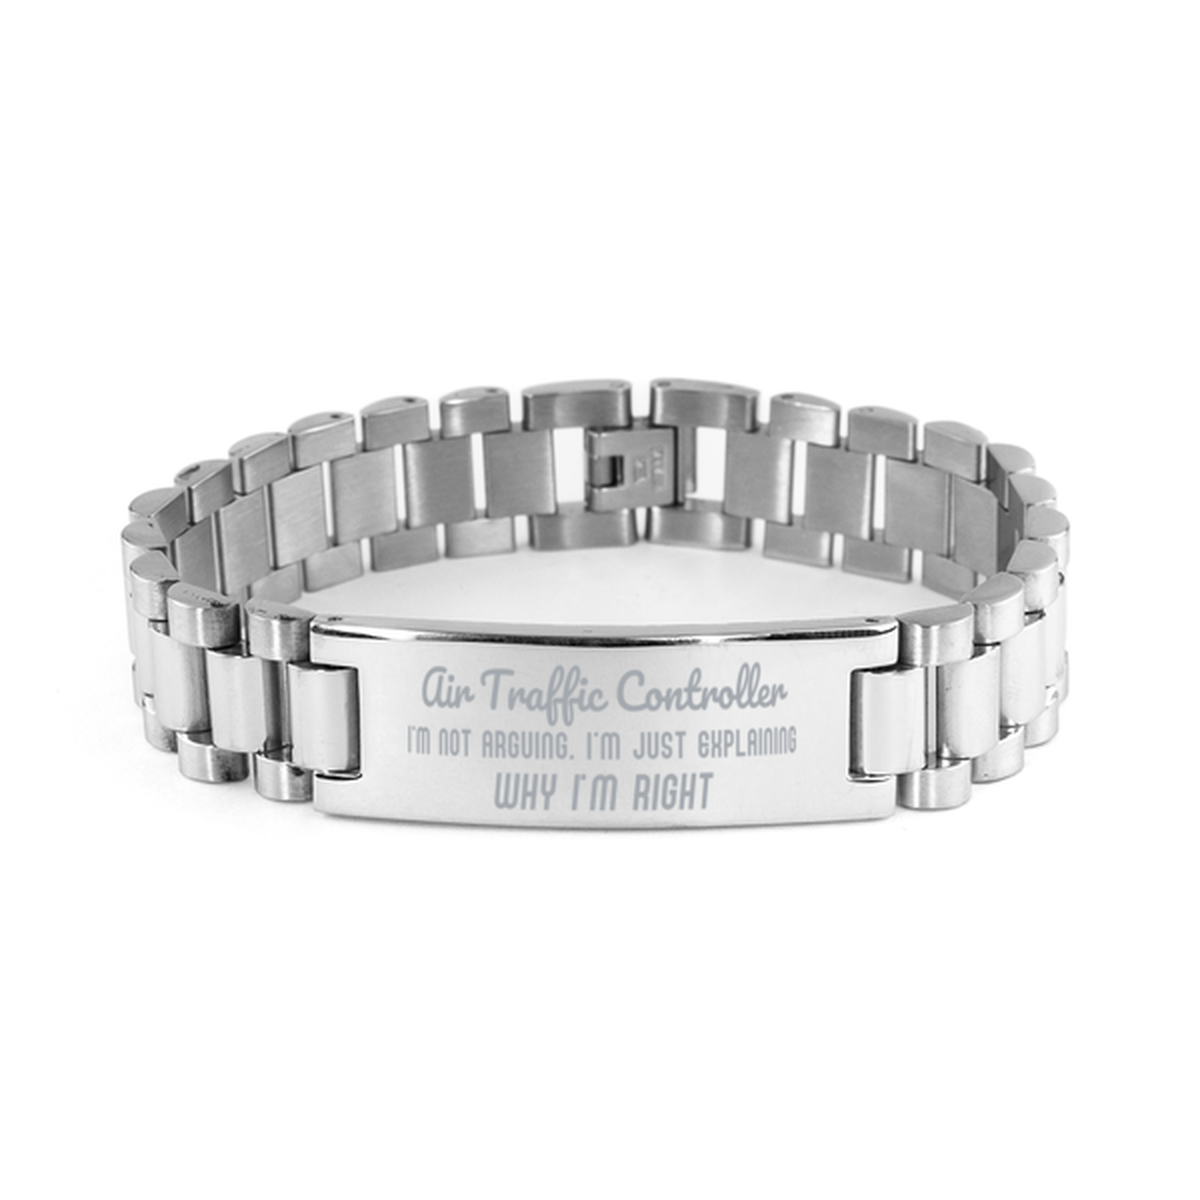 Air Traffic Controller I'm not Arguing. I'm Just Explaining Why I'm RIGHT Ladder Stainless Steel Bracelet, Graduation Birthday Christmas Air Traffic Controller Gifts For Air Traffic Controller Funny Saying Quote Present for Men Women Coworker